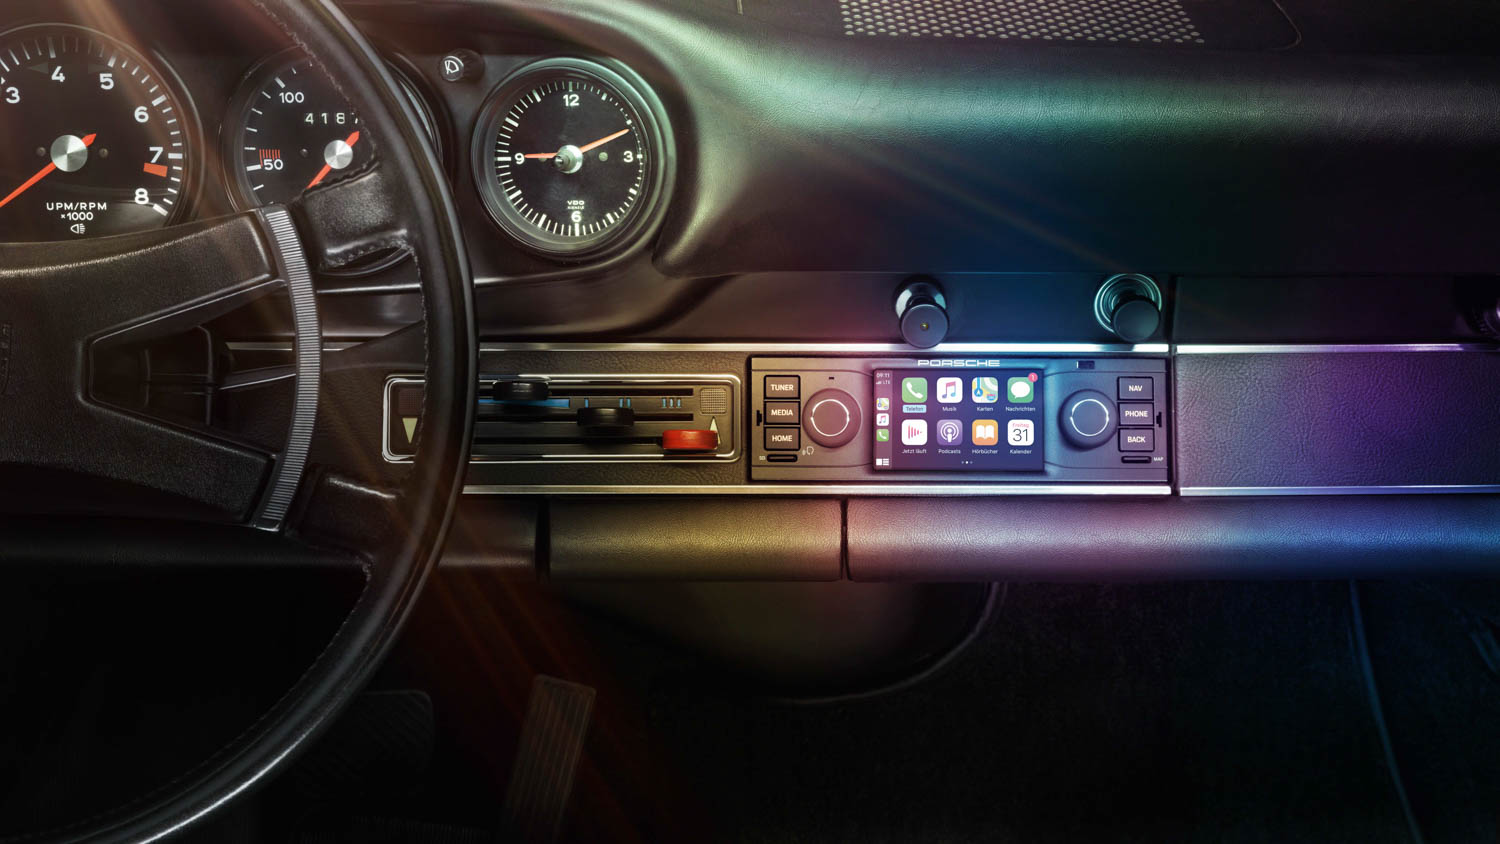 Tuned to perfection: Apple CarPlay now available for classic Porsches